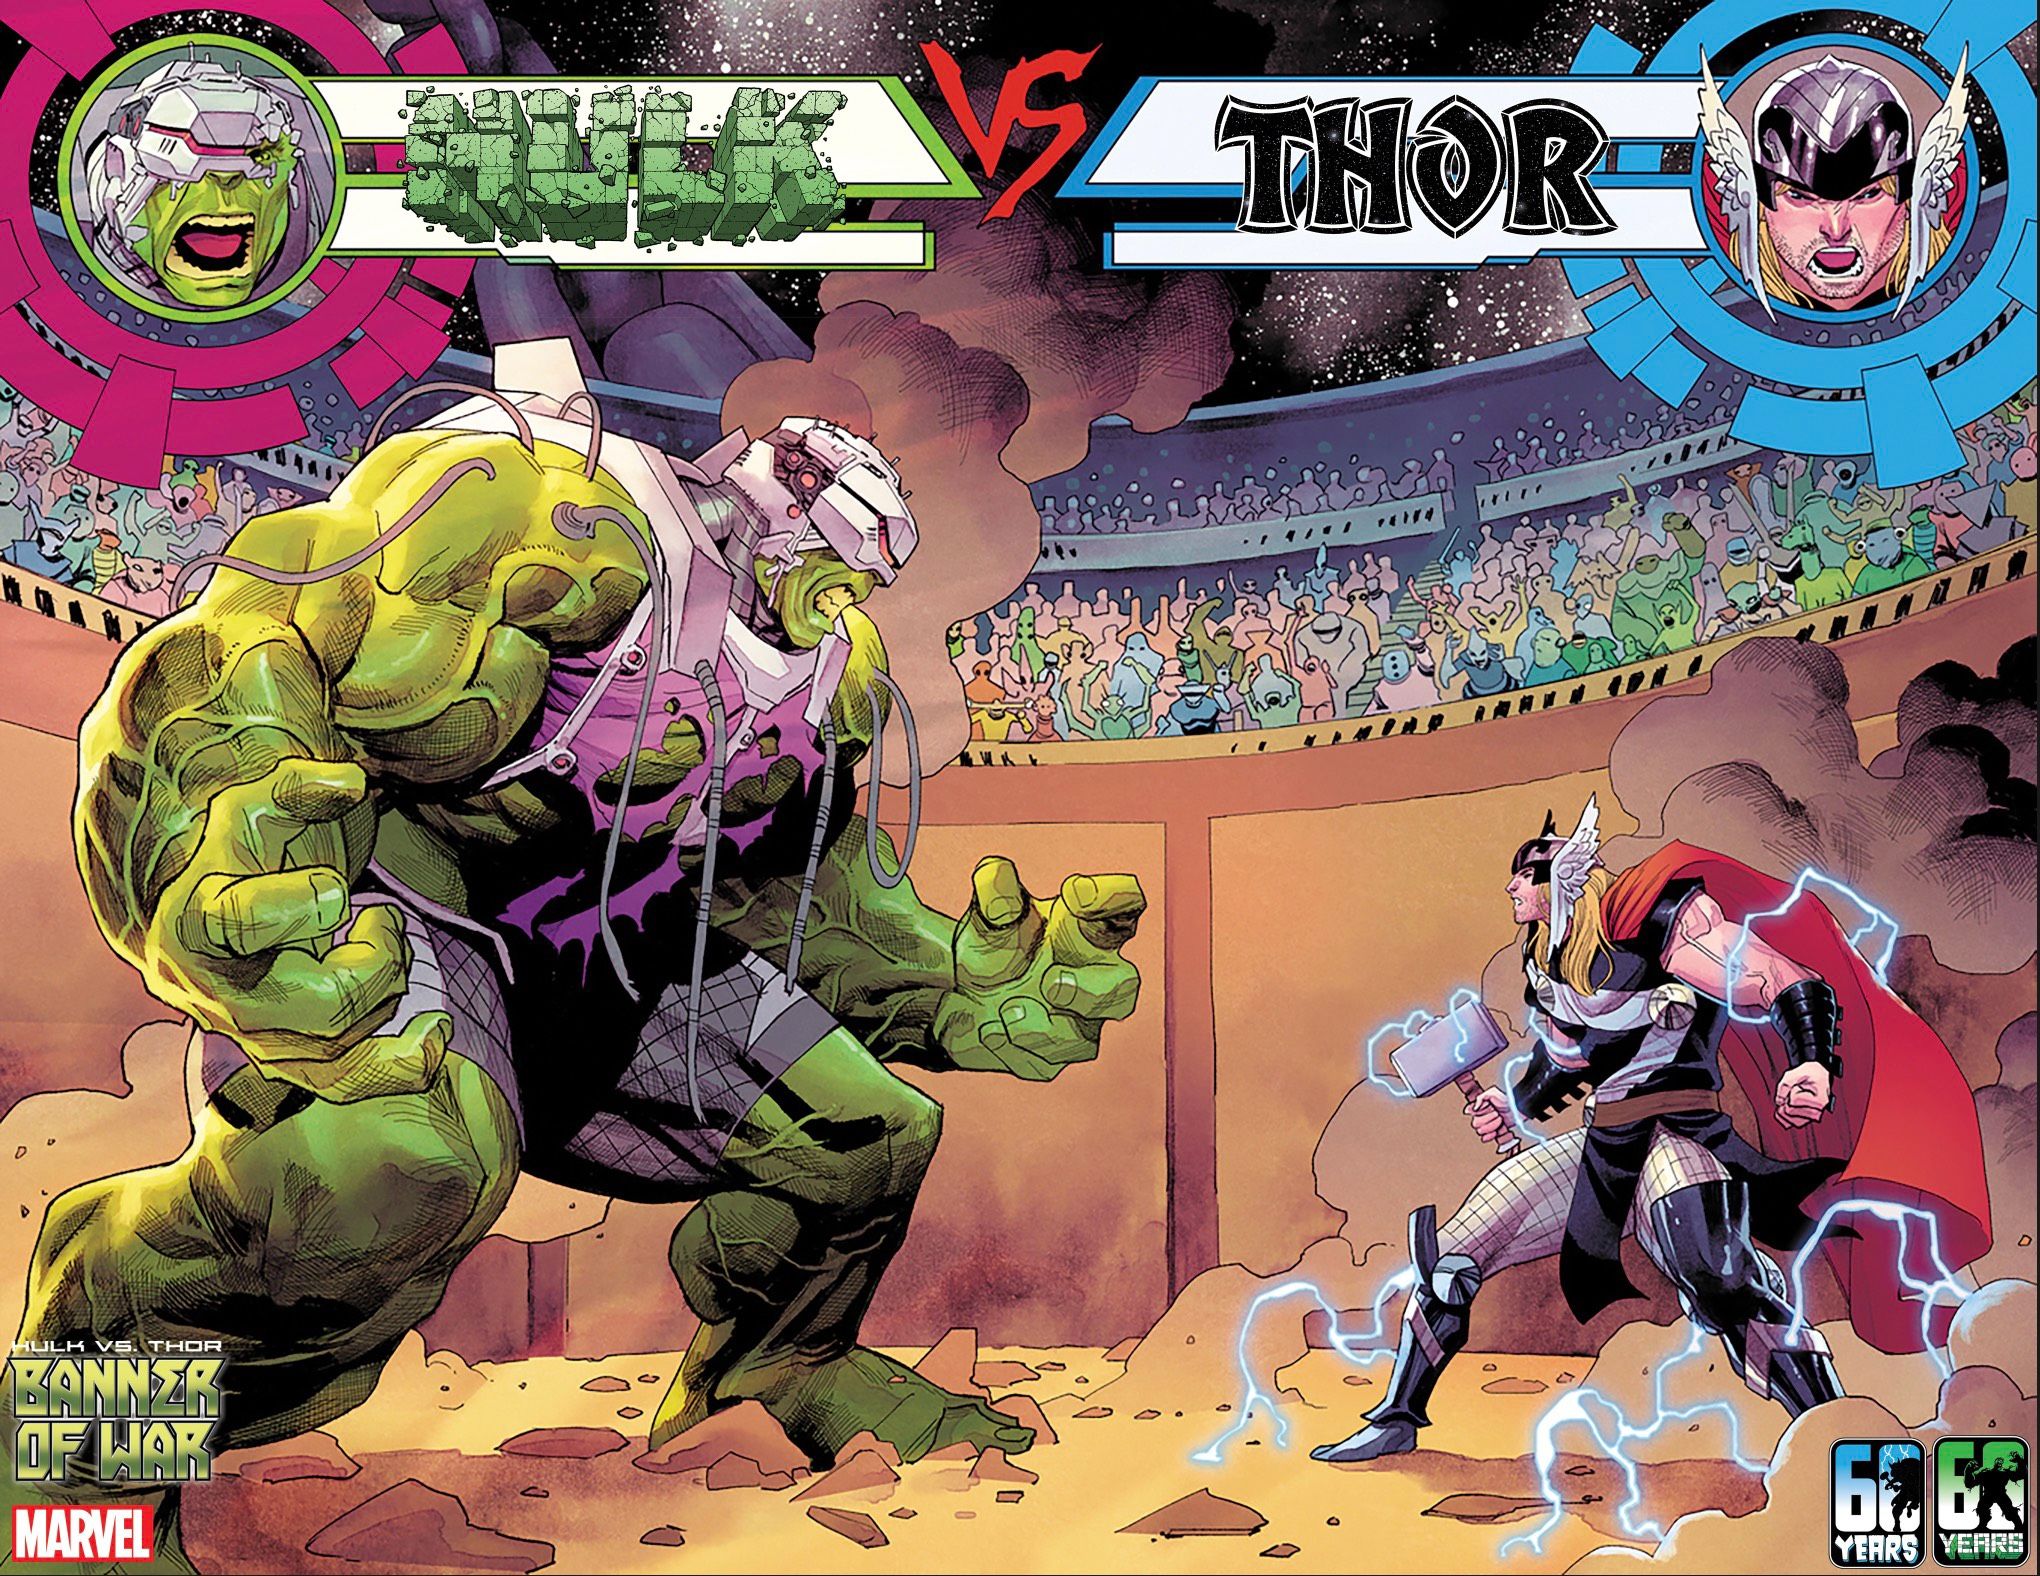 Hulk and Thor fighting in an alien arena